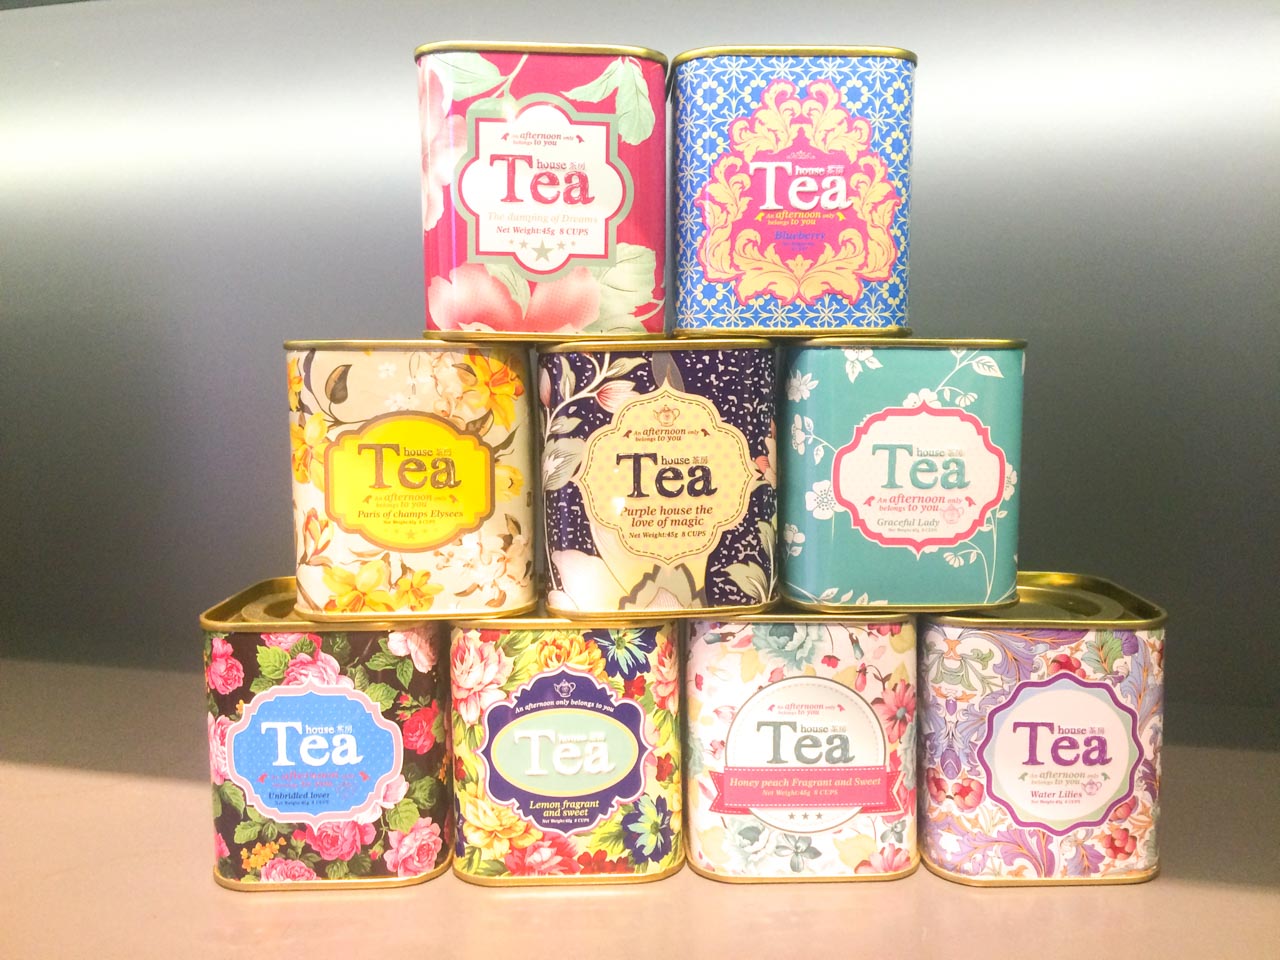 A pyramid made of different flavoured tea tins